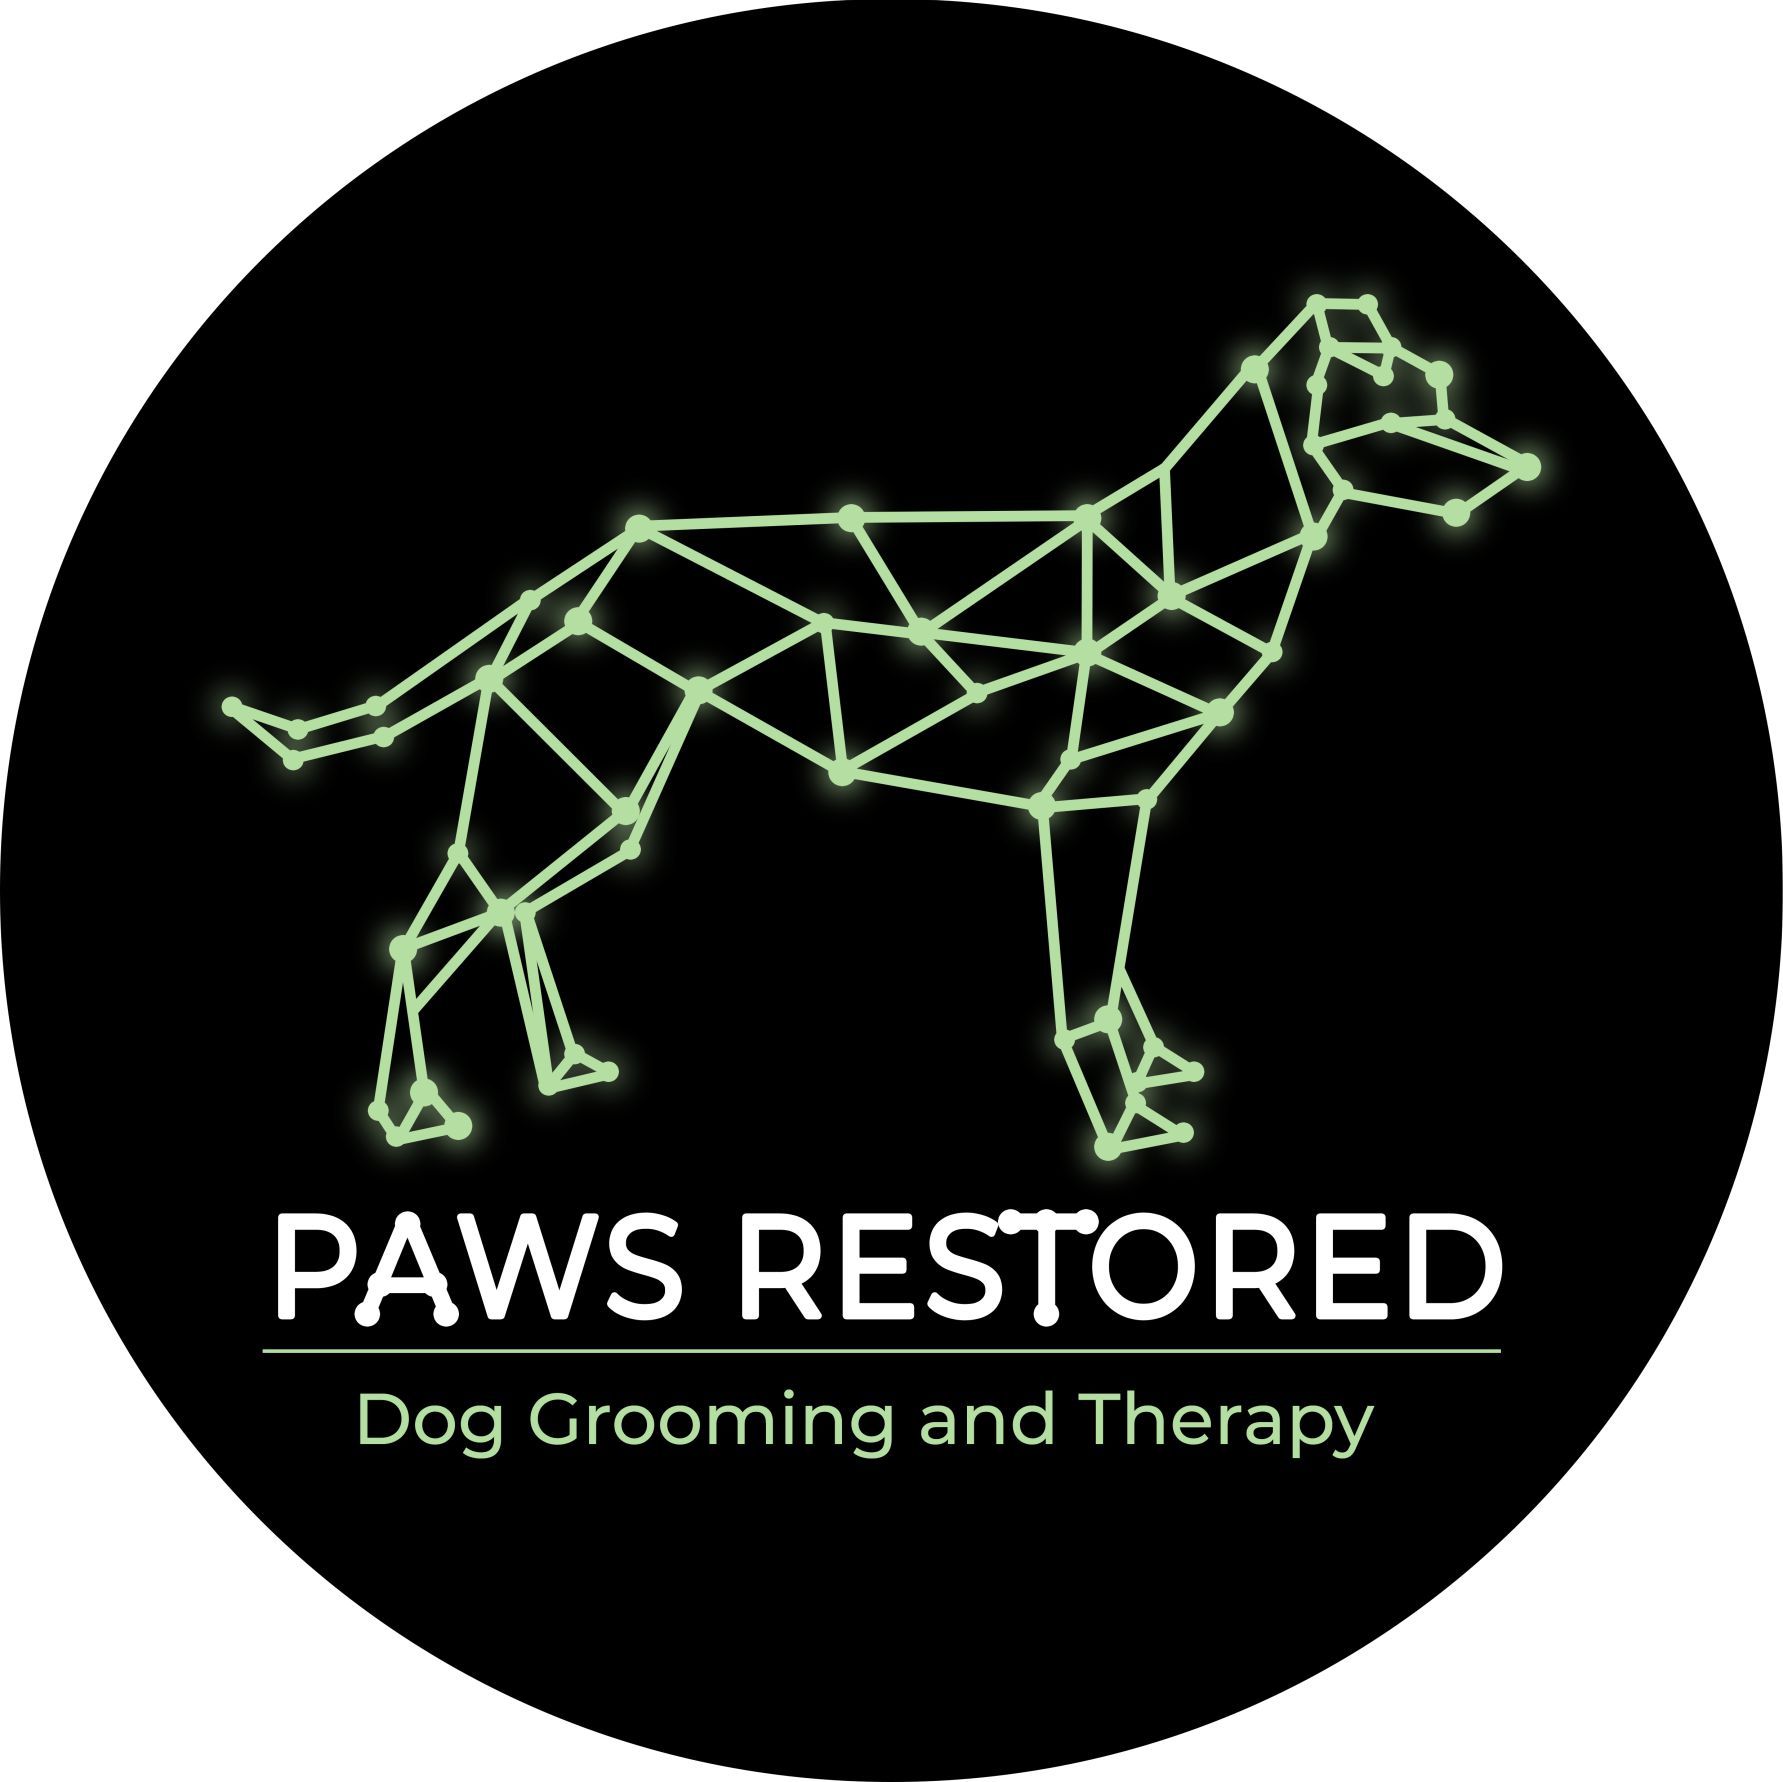 Paws Restored